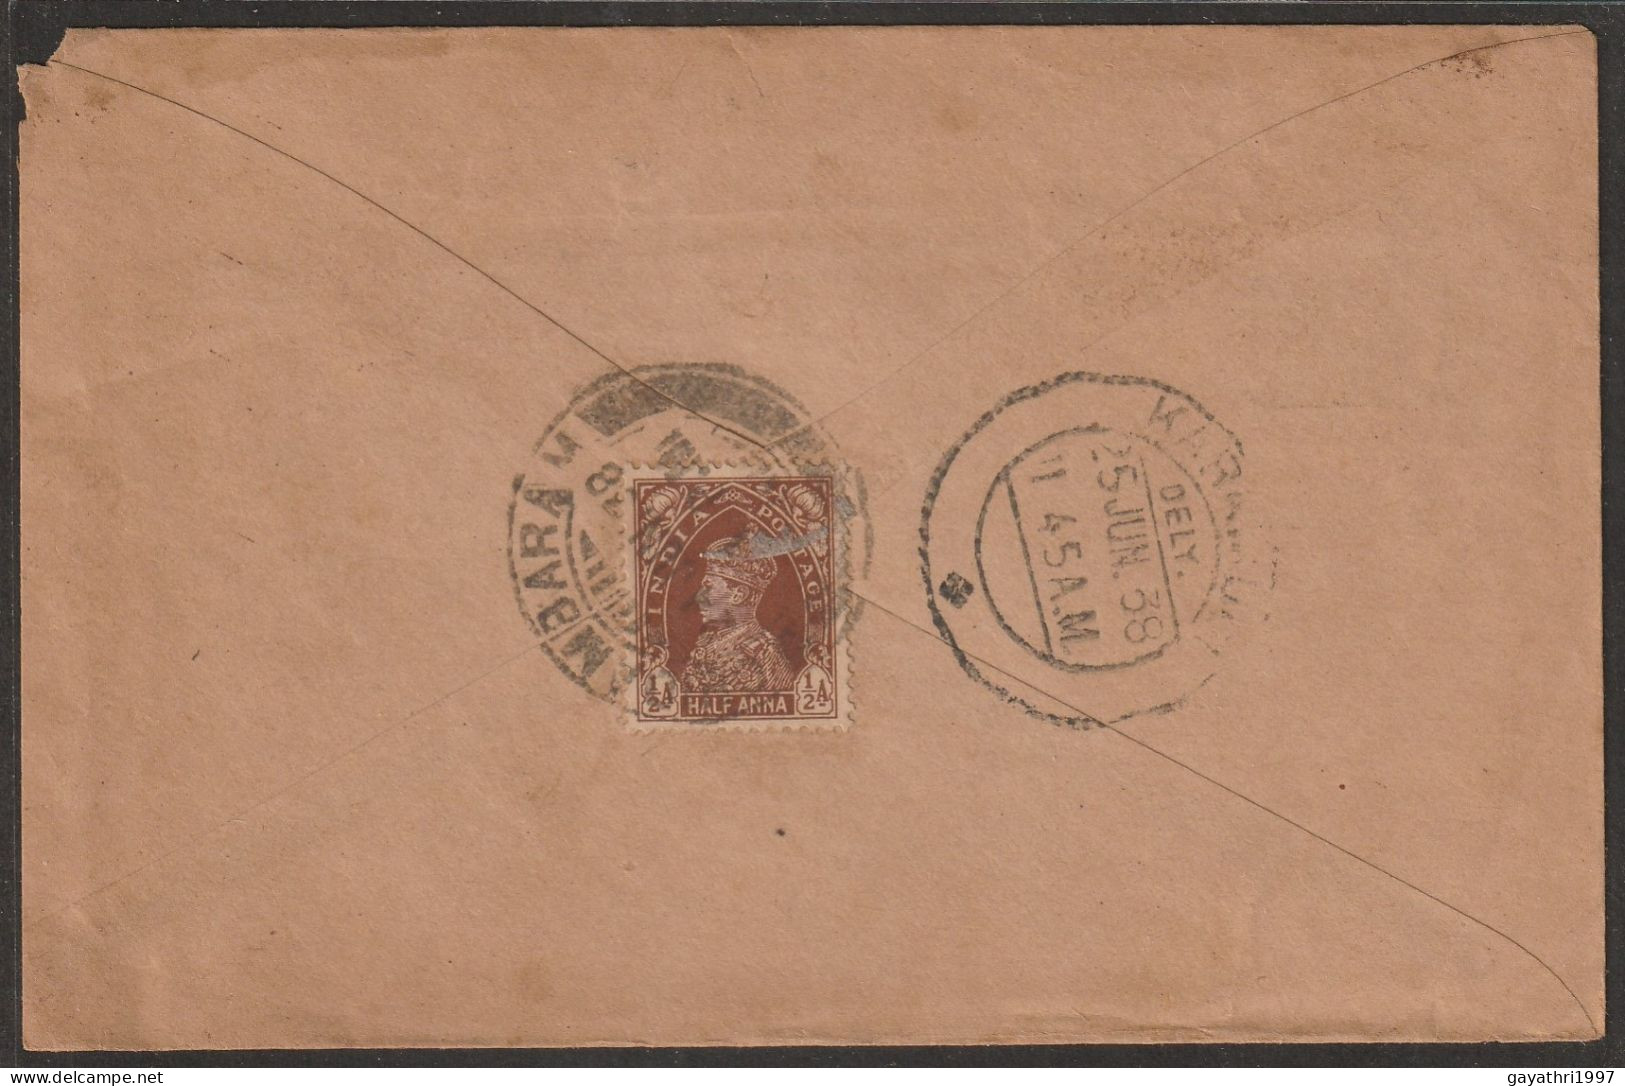 India 1938  K G VI Stamp On Cover From Chidambaram With Printed Hindu God (a71) - Hindouisme